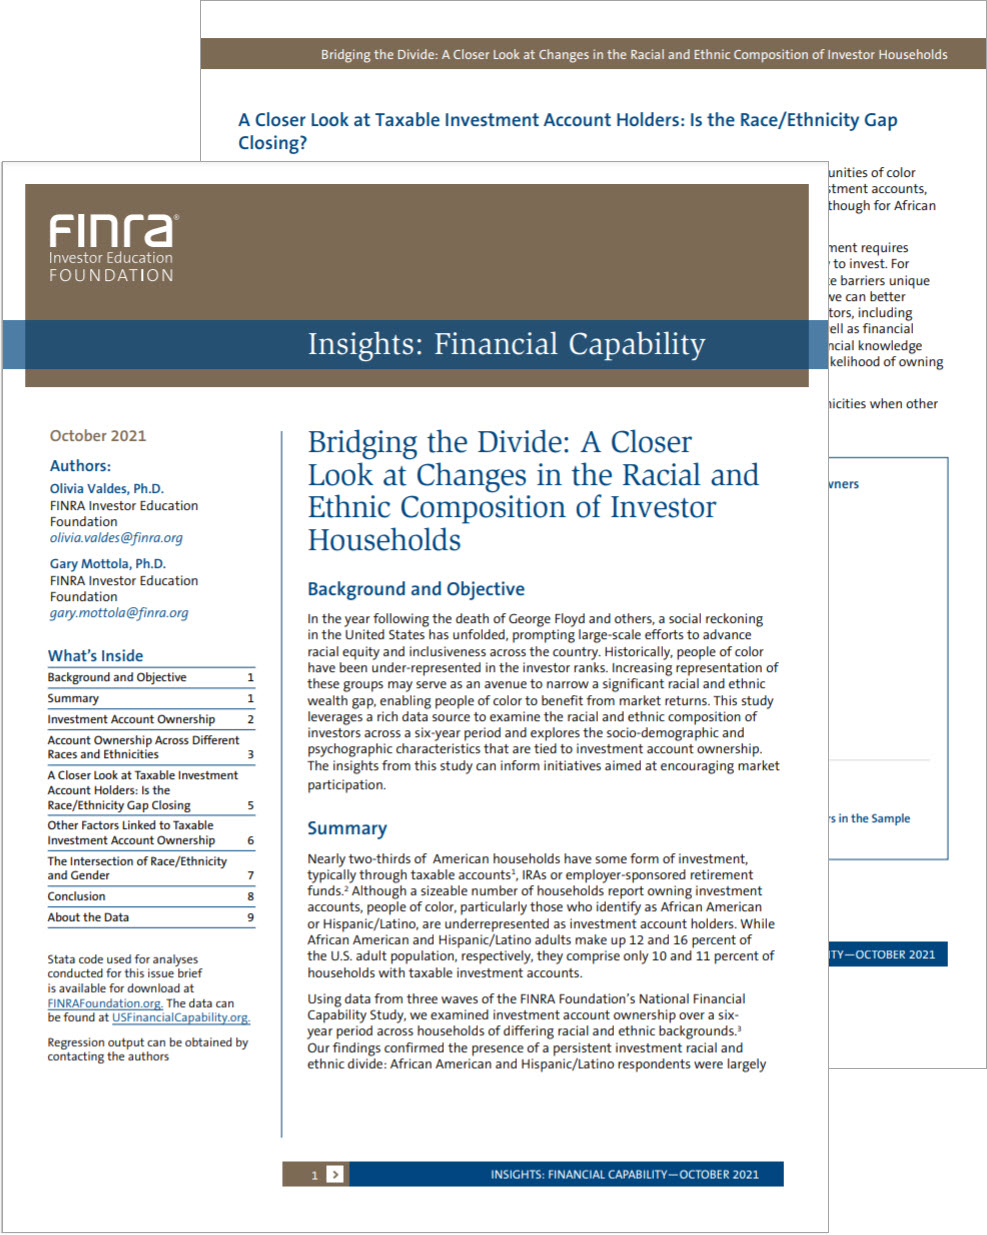 Bridging the Divide: A Closer Look at Changes in the Racial and Ethnic Composition of Investor Households